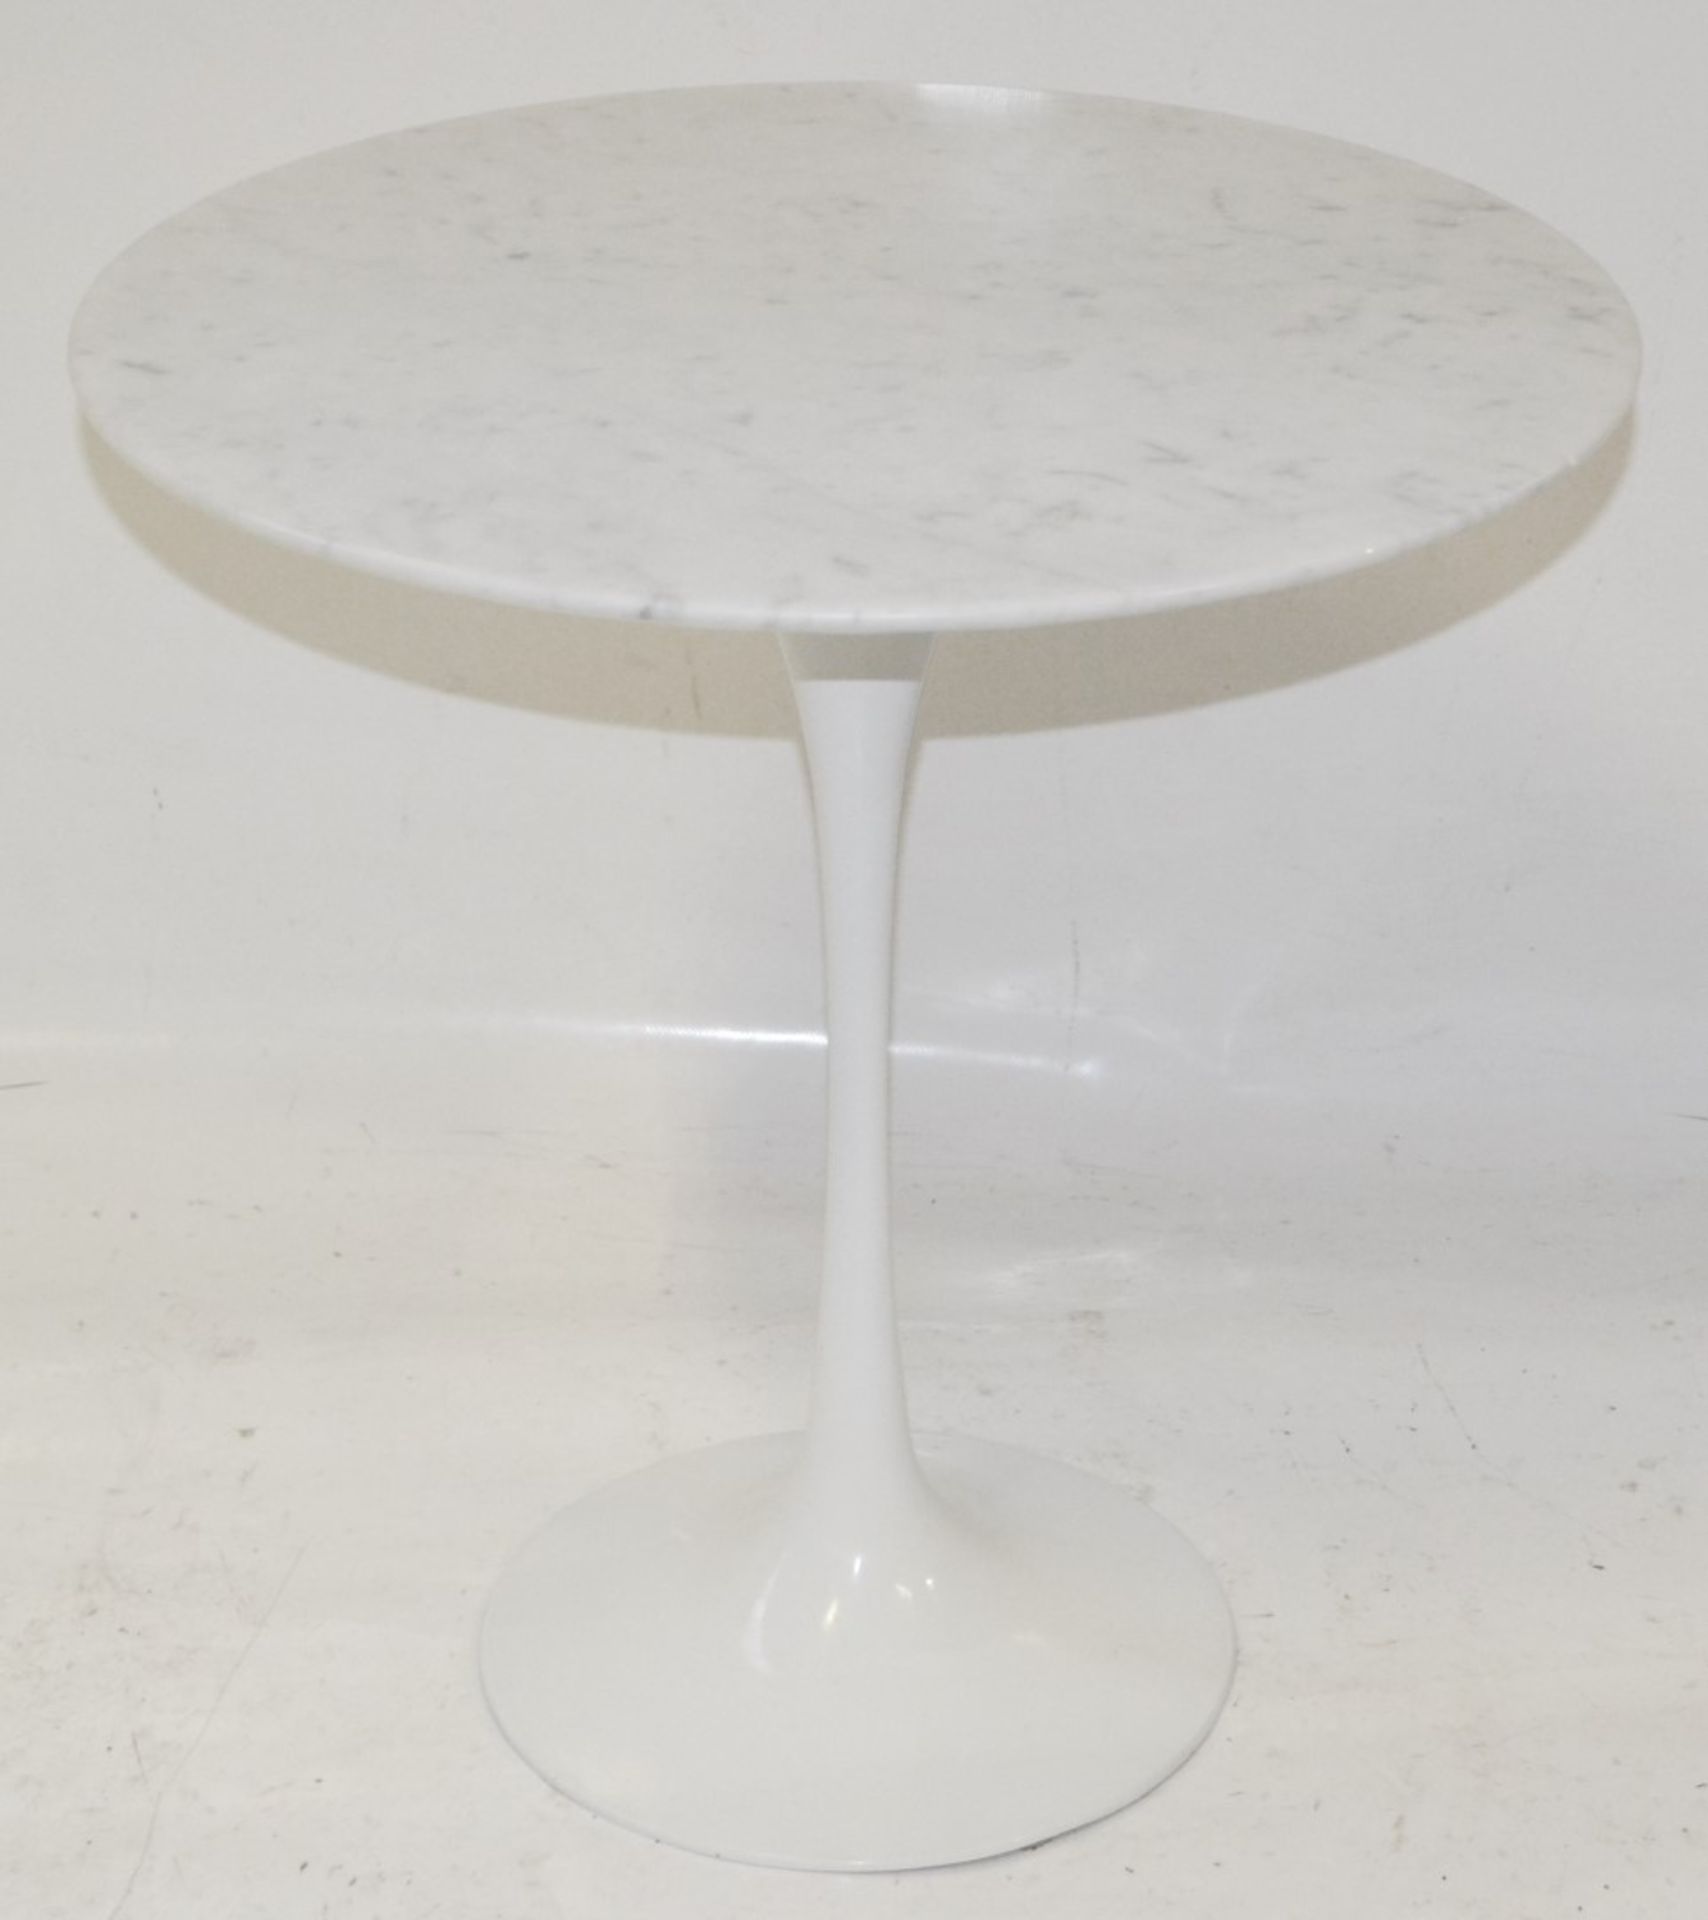 1 x White Marble-Topped Tulip Table In The Style Of Eero Saarinen, In Good Overall Condition - CL327